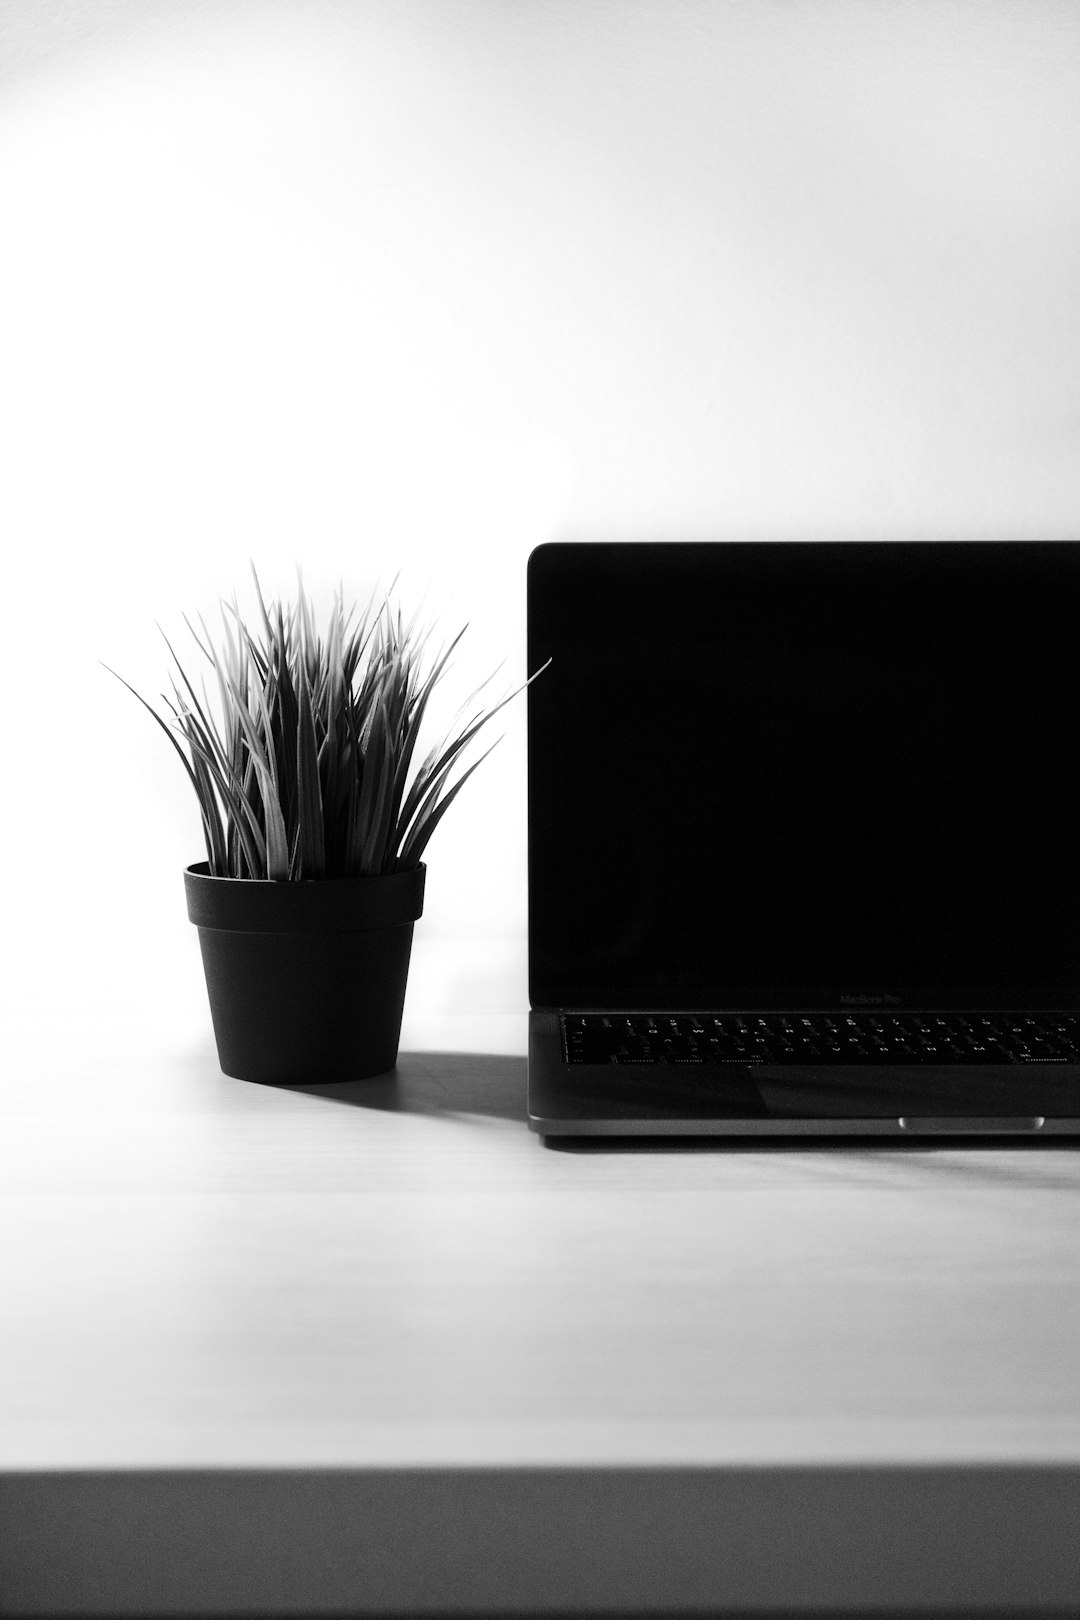 A black and white photograph shows an open laptop on the right side, placed on a clean desk with a potted plant beside it. The background is a plain white. The overall composition creates contrast between the lightness of the background and the darkness inside the computer screen, highlighting its presence. –ar 85:128